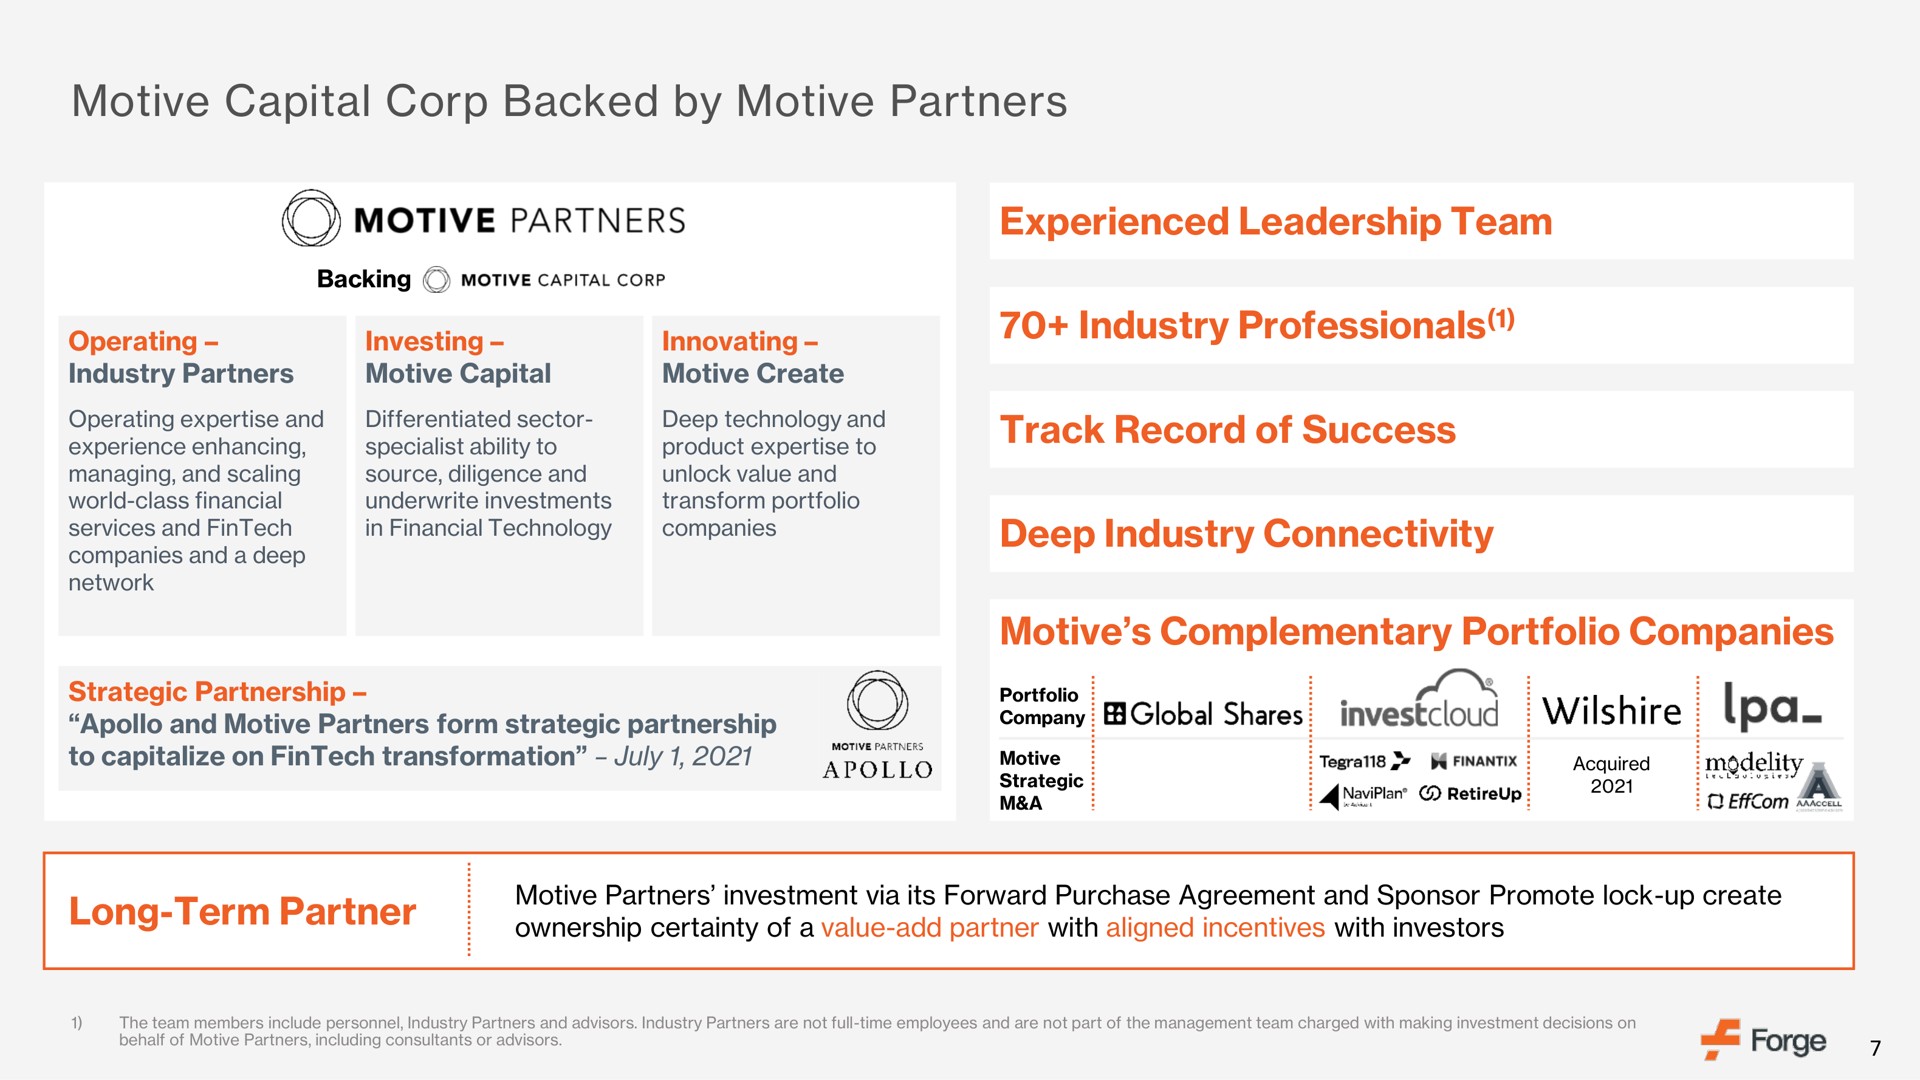 motive capital corp backed by motive partners experienced leadership team industry professionals track record of success deep industry connectivity motive complementary portfolio companies long term partner company shares | Forge